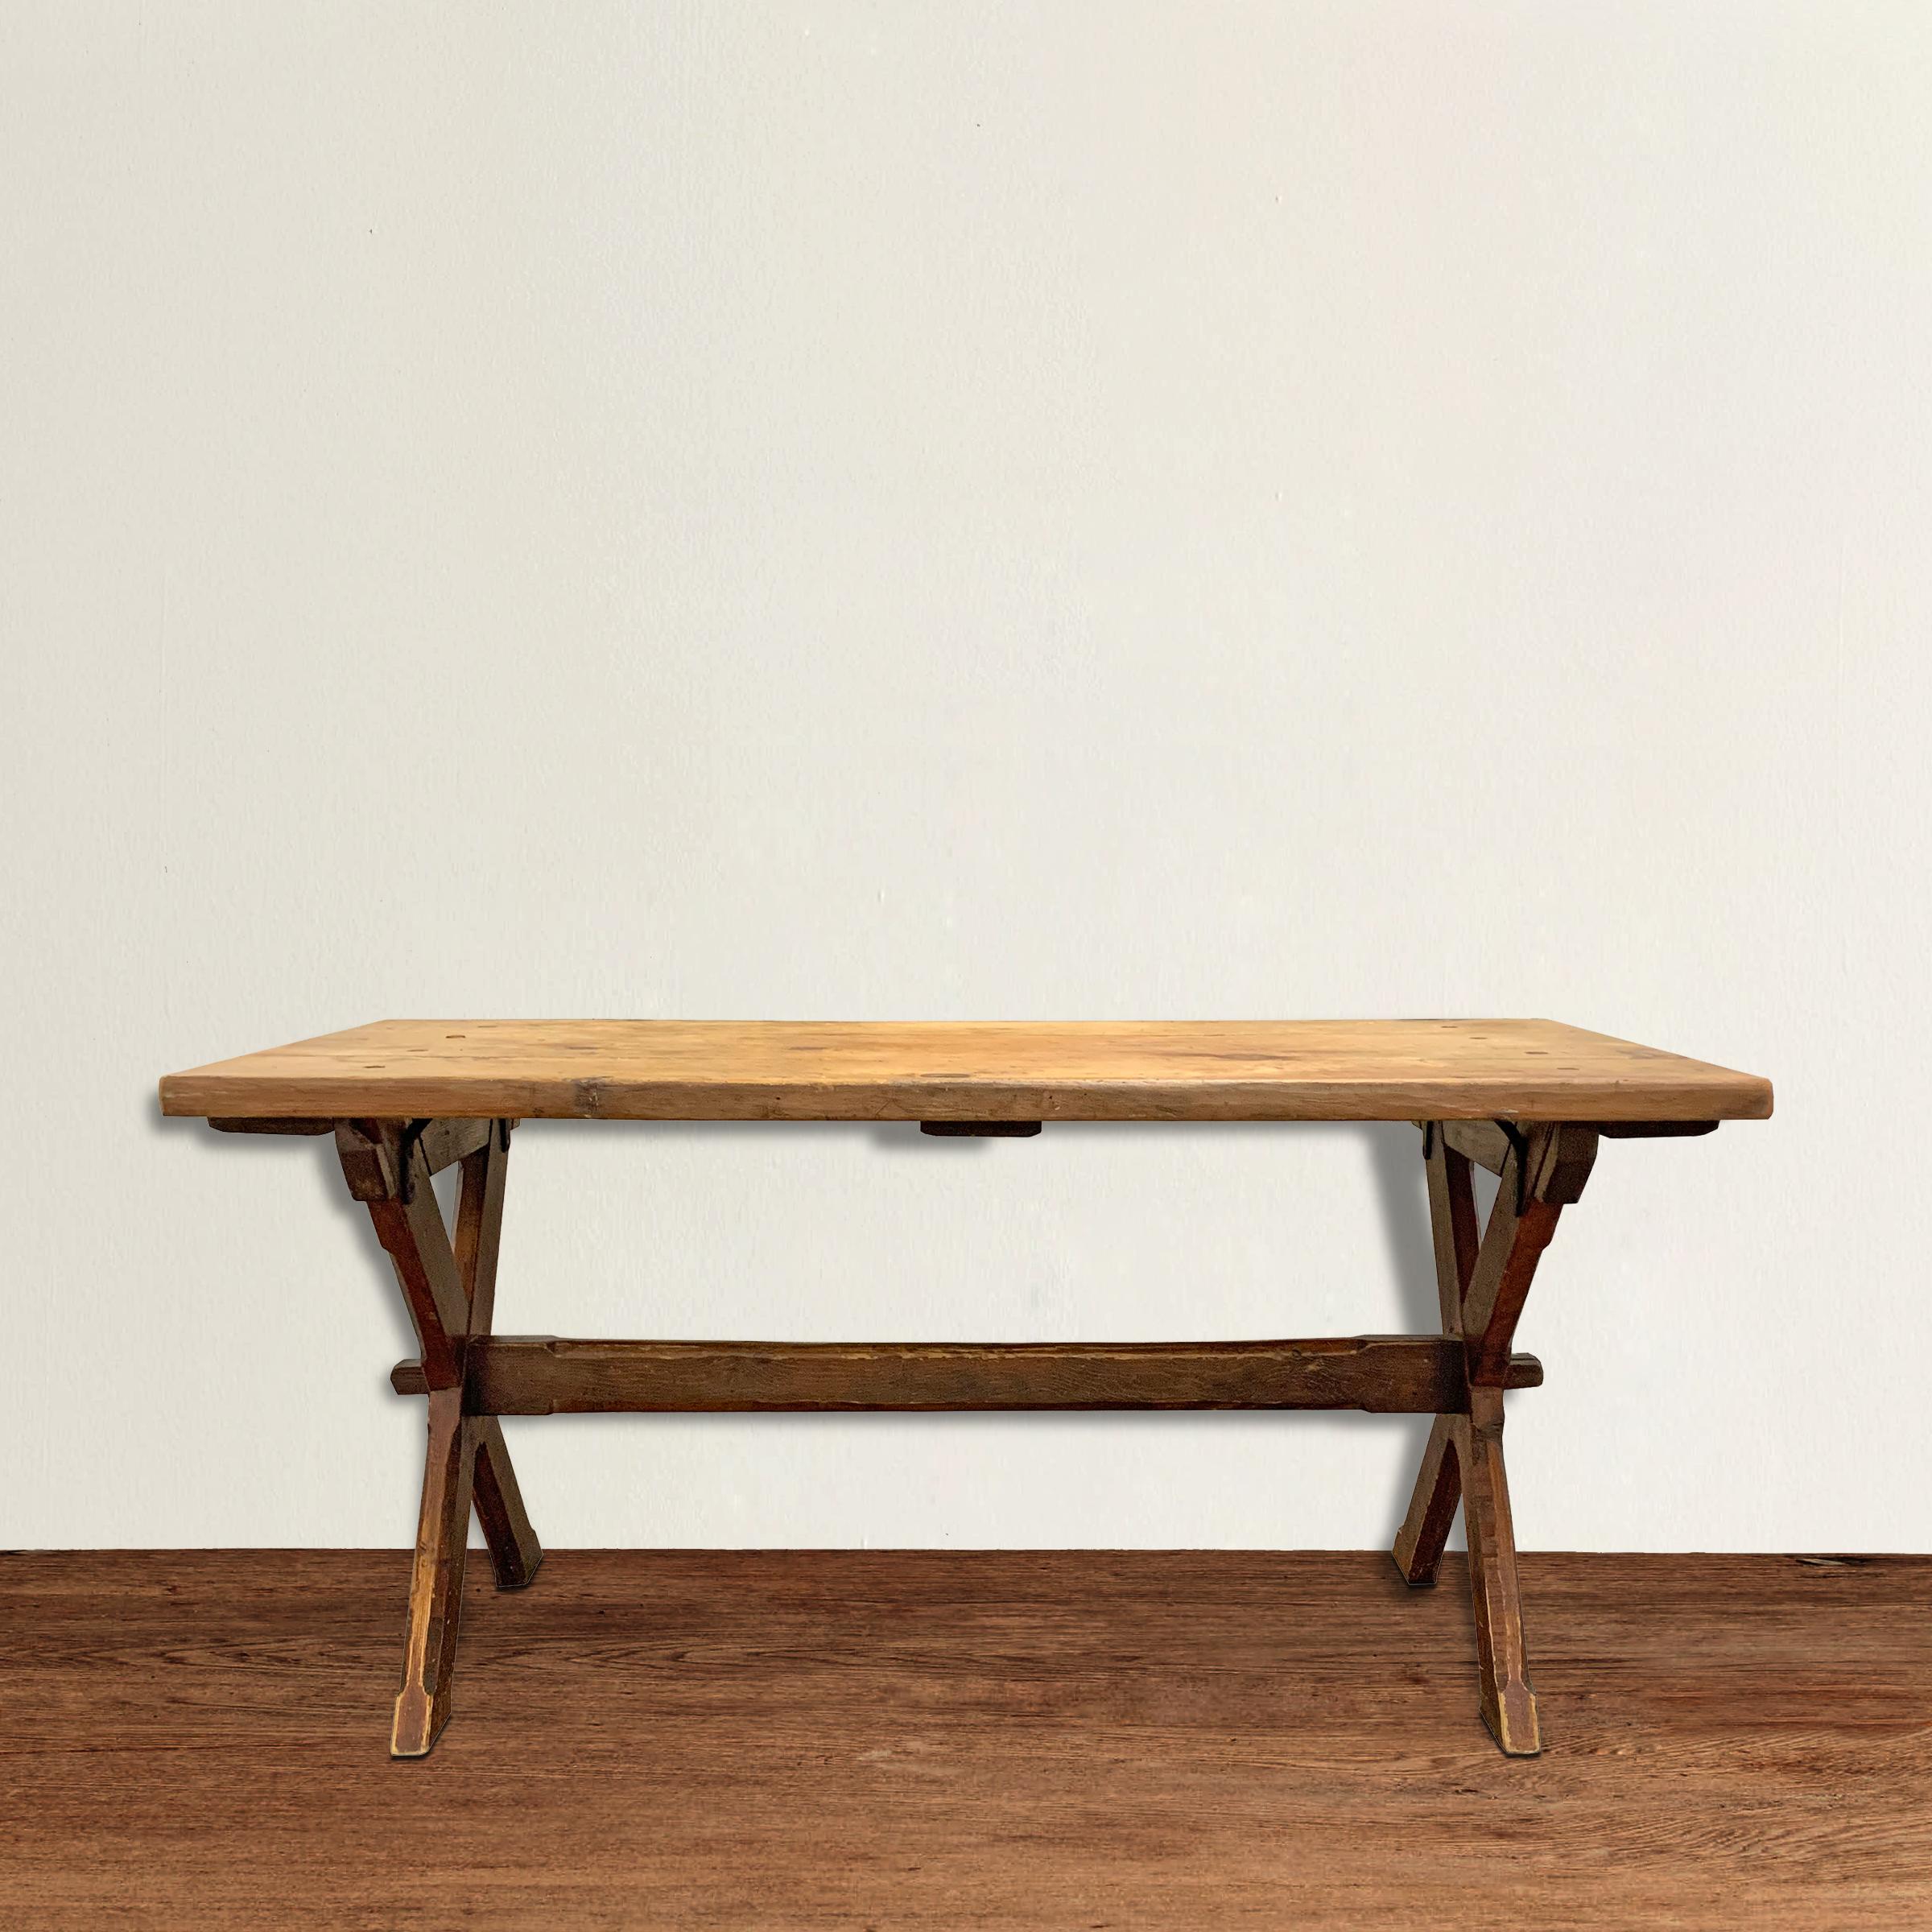 A wonderful 19th century American pine trestle table with an X-form base with chamfered legs, and a stretcher that's pegged on each end. Traces of the table's original paint remains on the legs, and the thick pine top is unfinished and beautifully